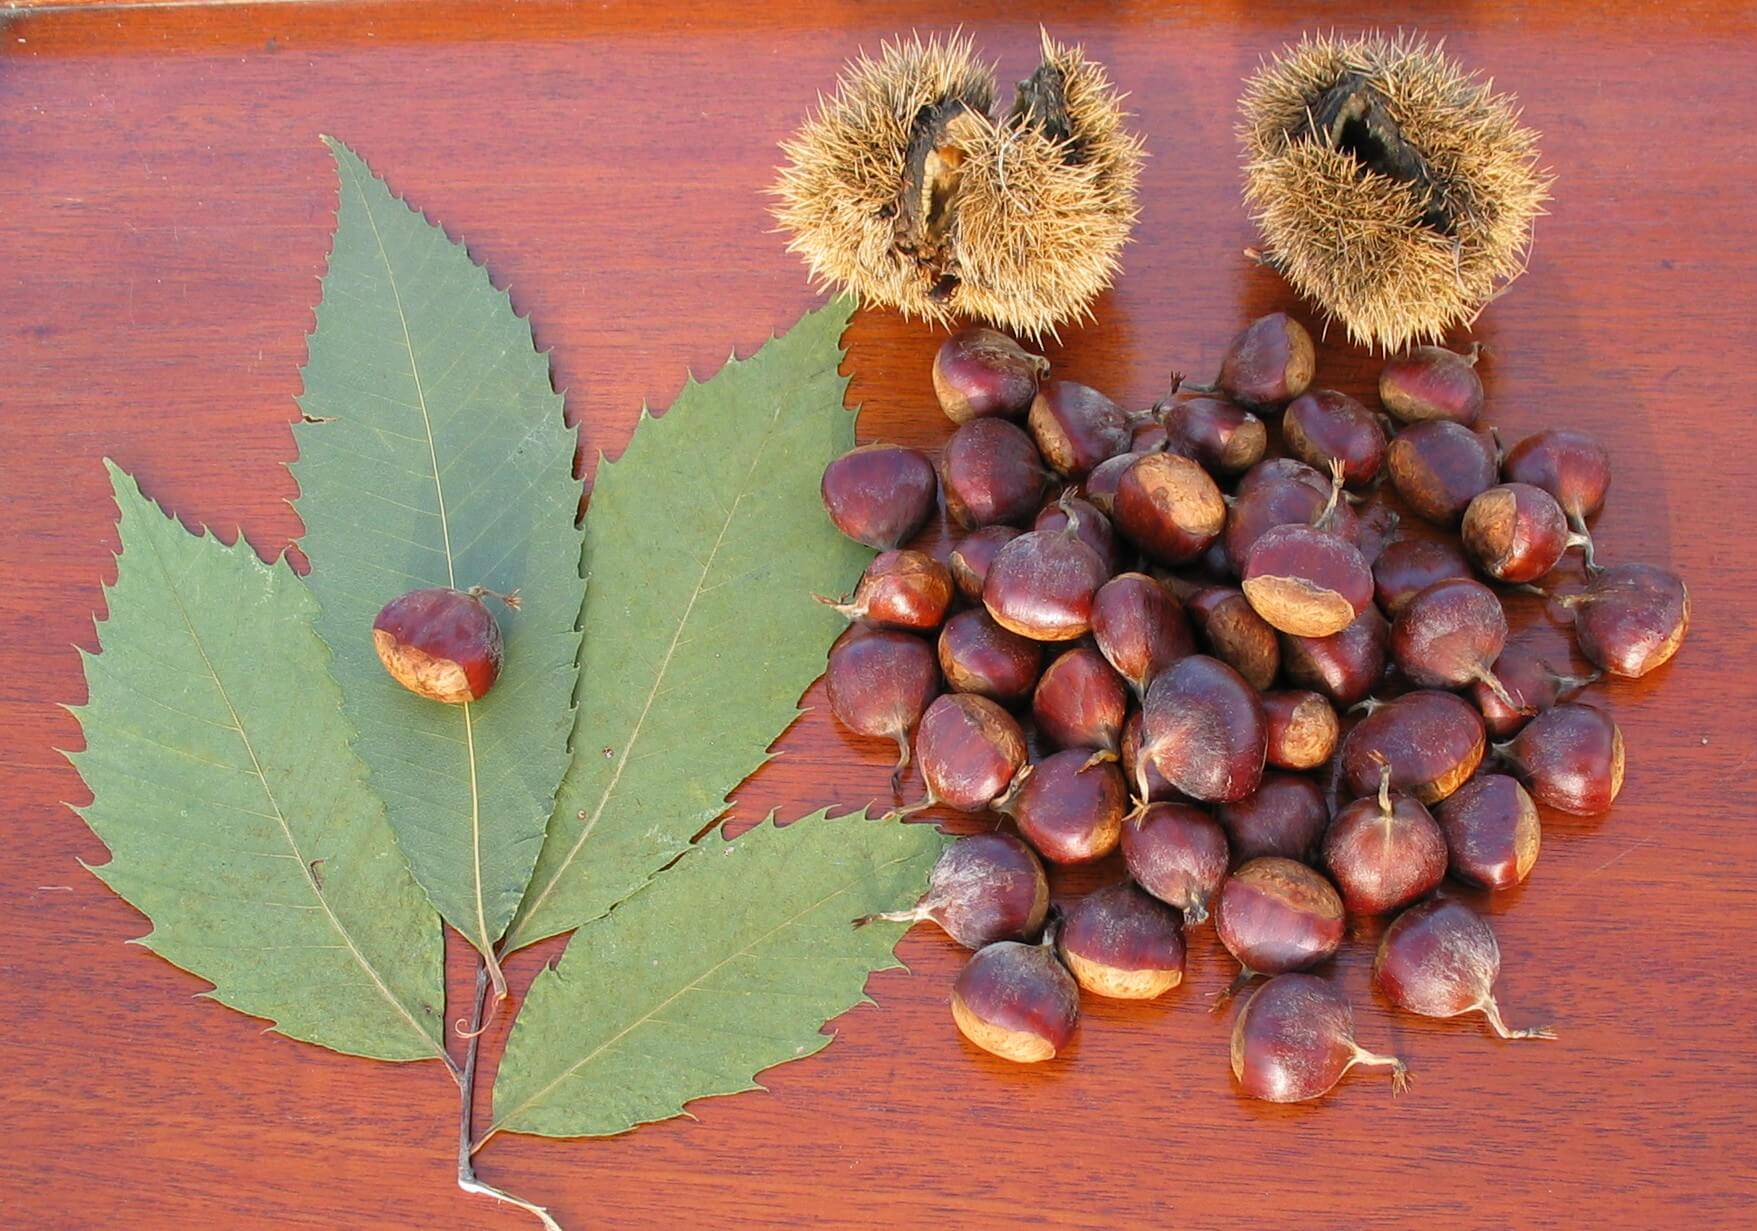 American Chestnut leaves, burrs and nuts